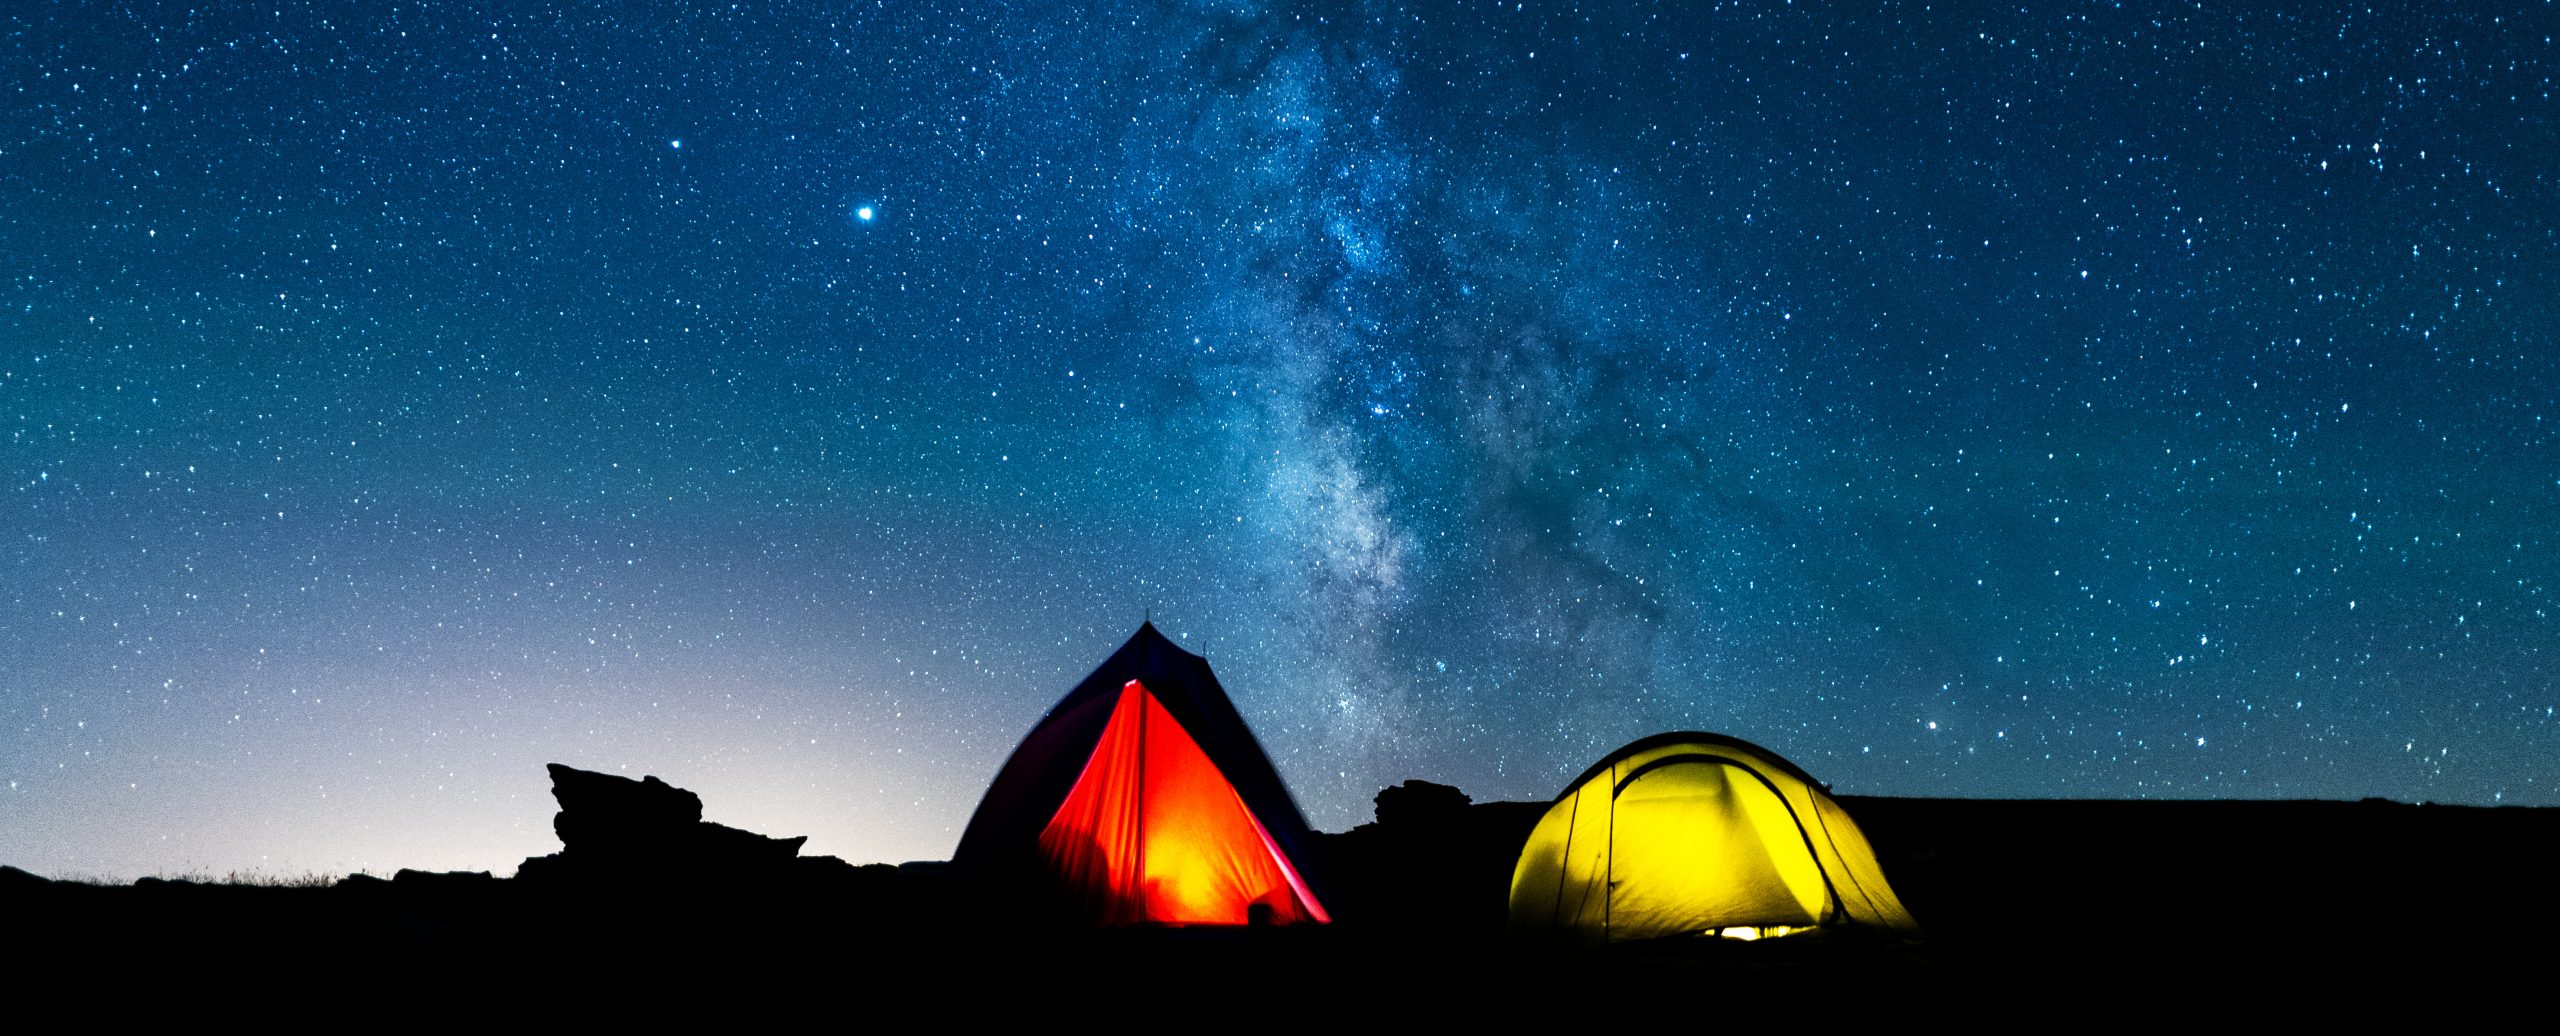 Tents glowing under the milky way at night. Camping in the mountains under the starry magical sky. Camping and wild life concept. Real outdoor adventure.